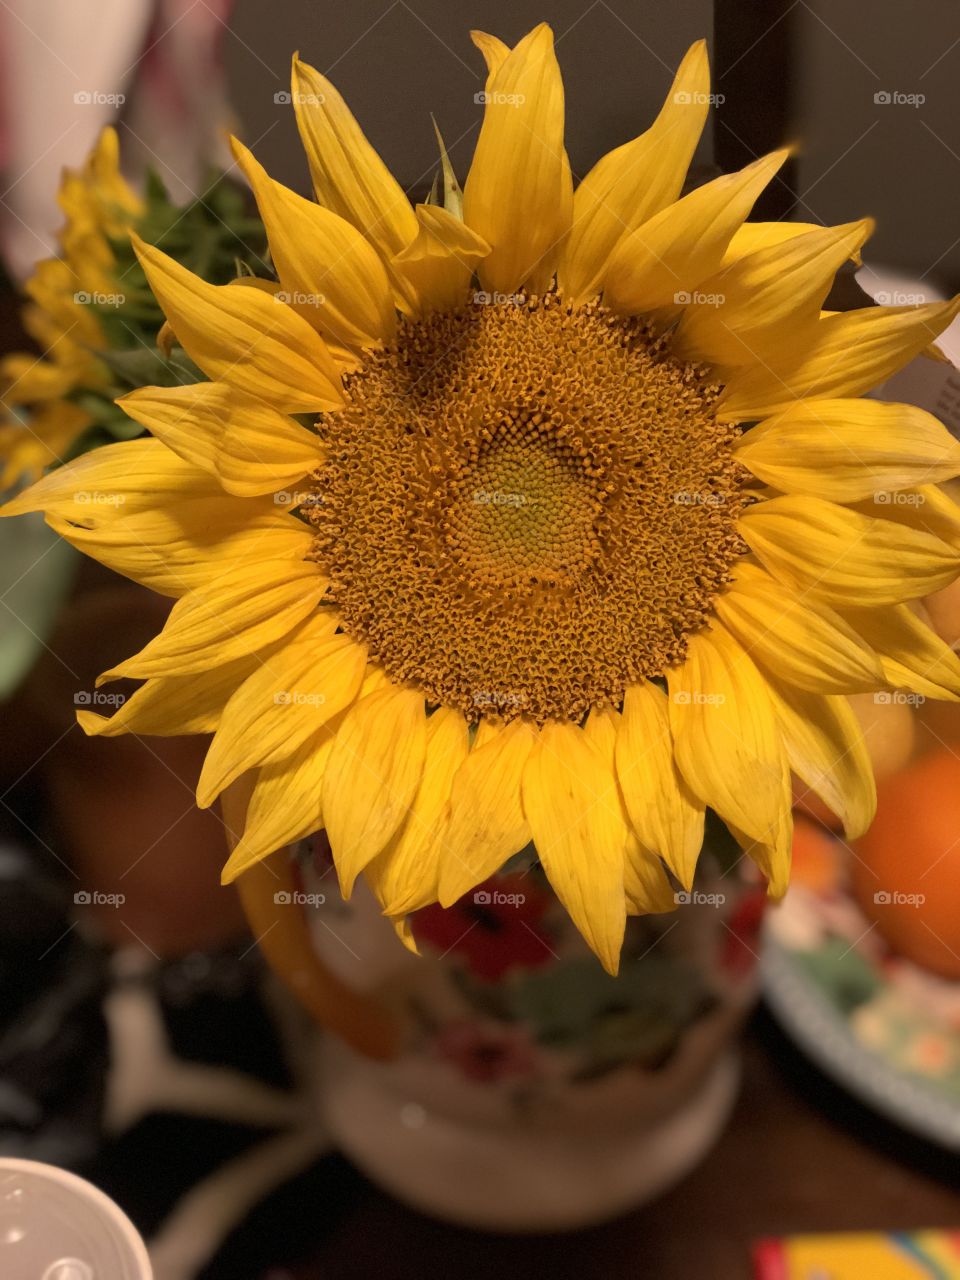 Close up of a single  yellow sunflower in a pioneer woman vase.